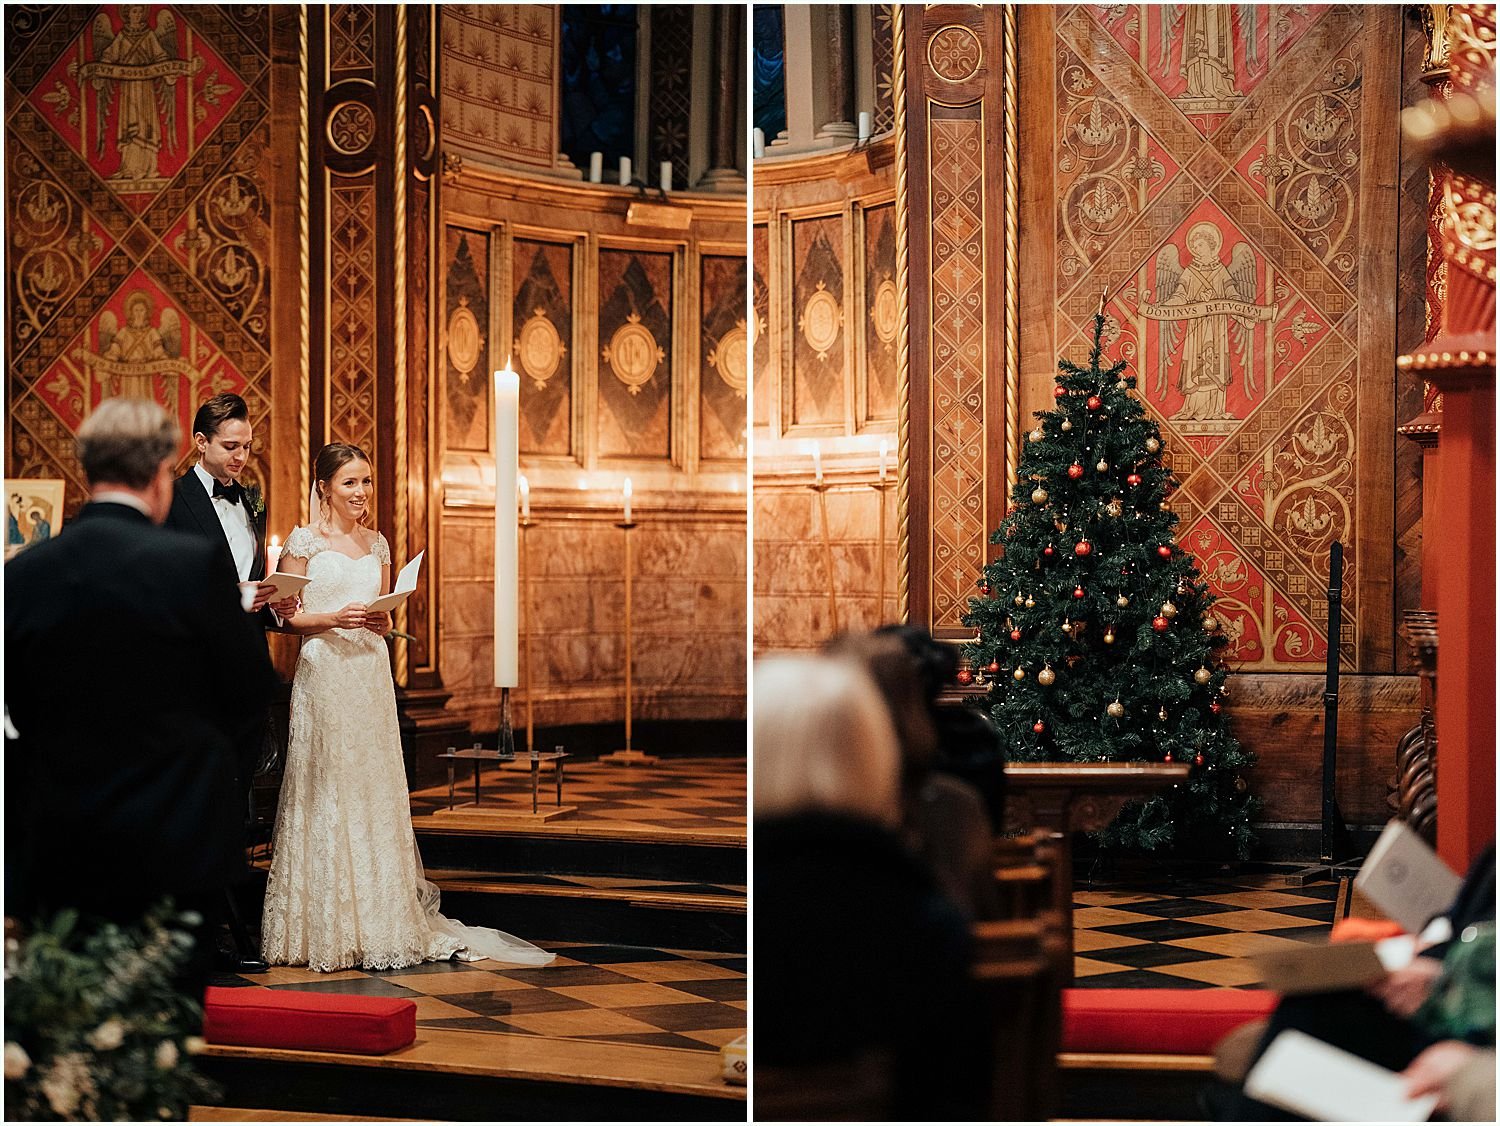 Wedding ceremony at Christmas in Kings College Chapel London